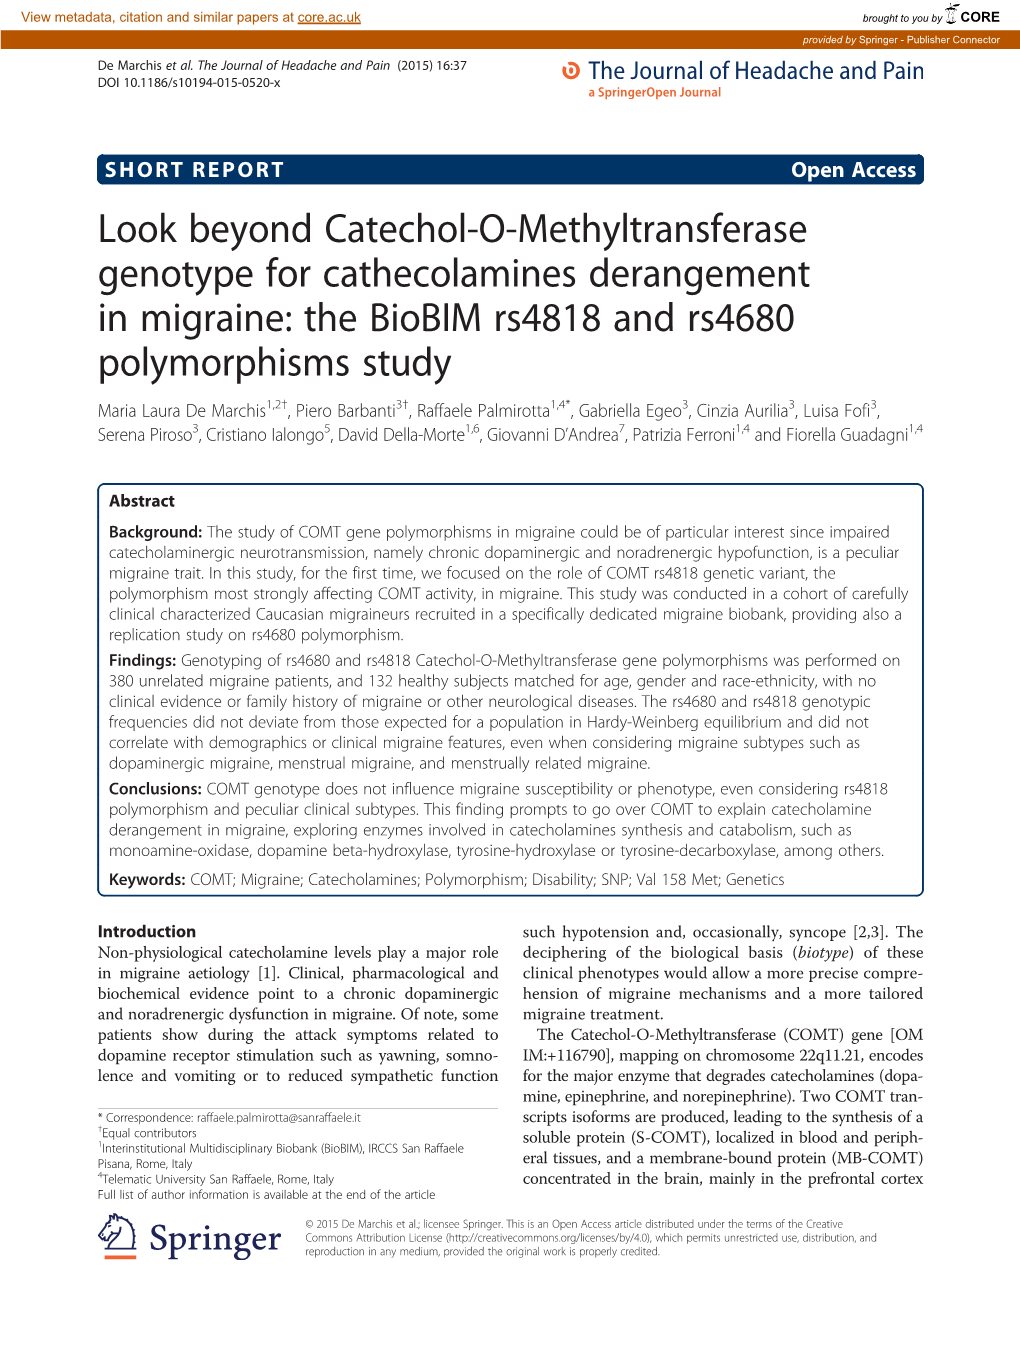 Look Beyond Catechol-O-Methyltransferase Genotype for Cathecolamines Derangement in Migraine: the Biobim Rs4818 and Rs4680 Polym